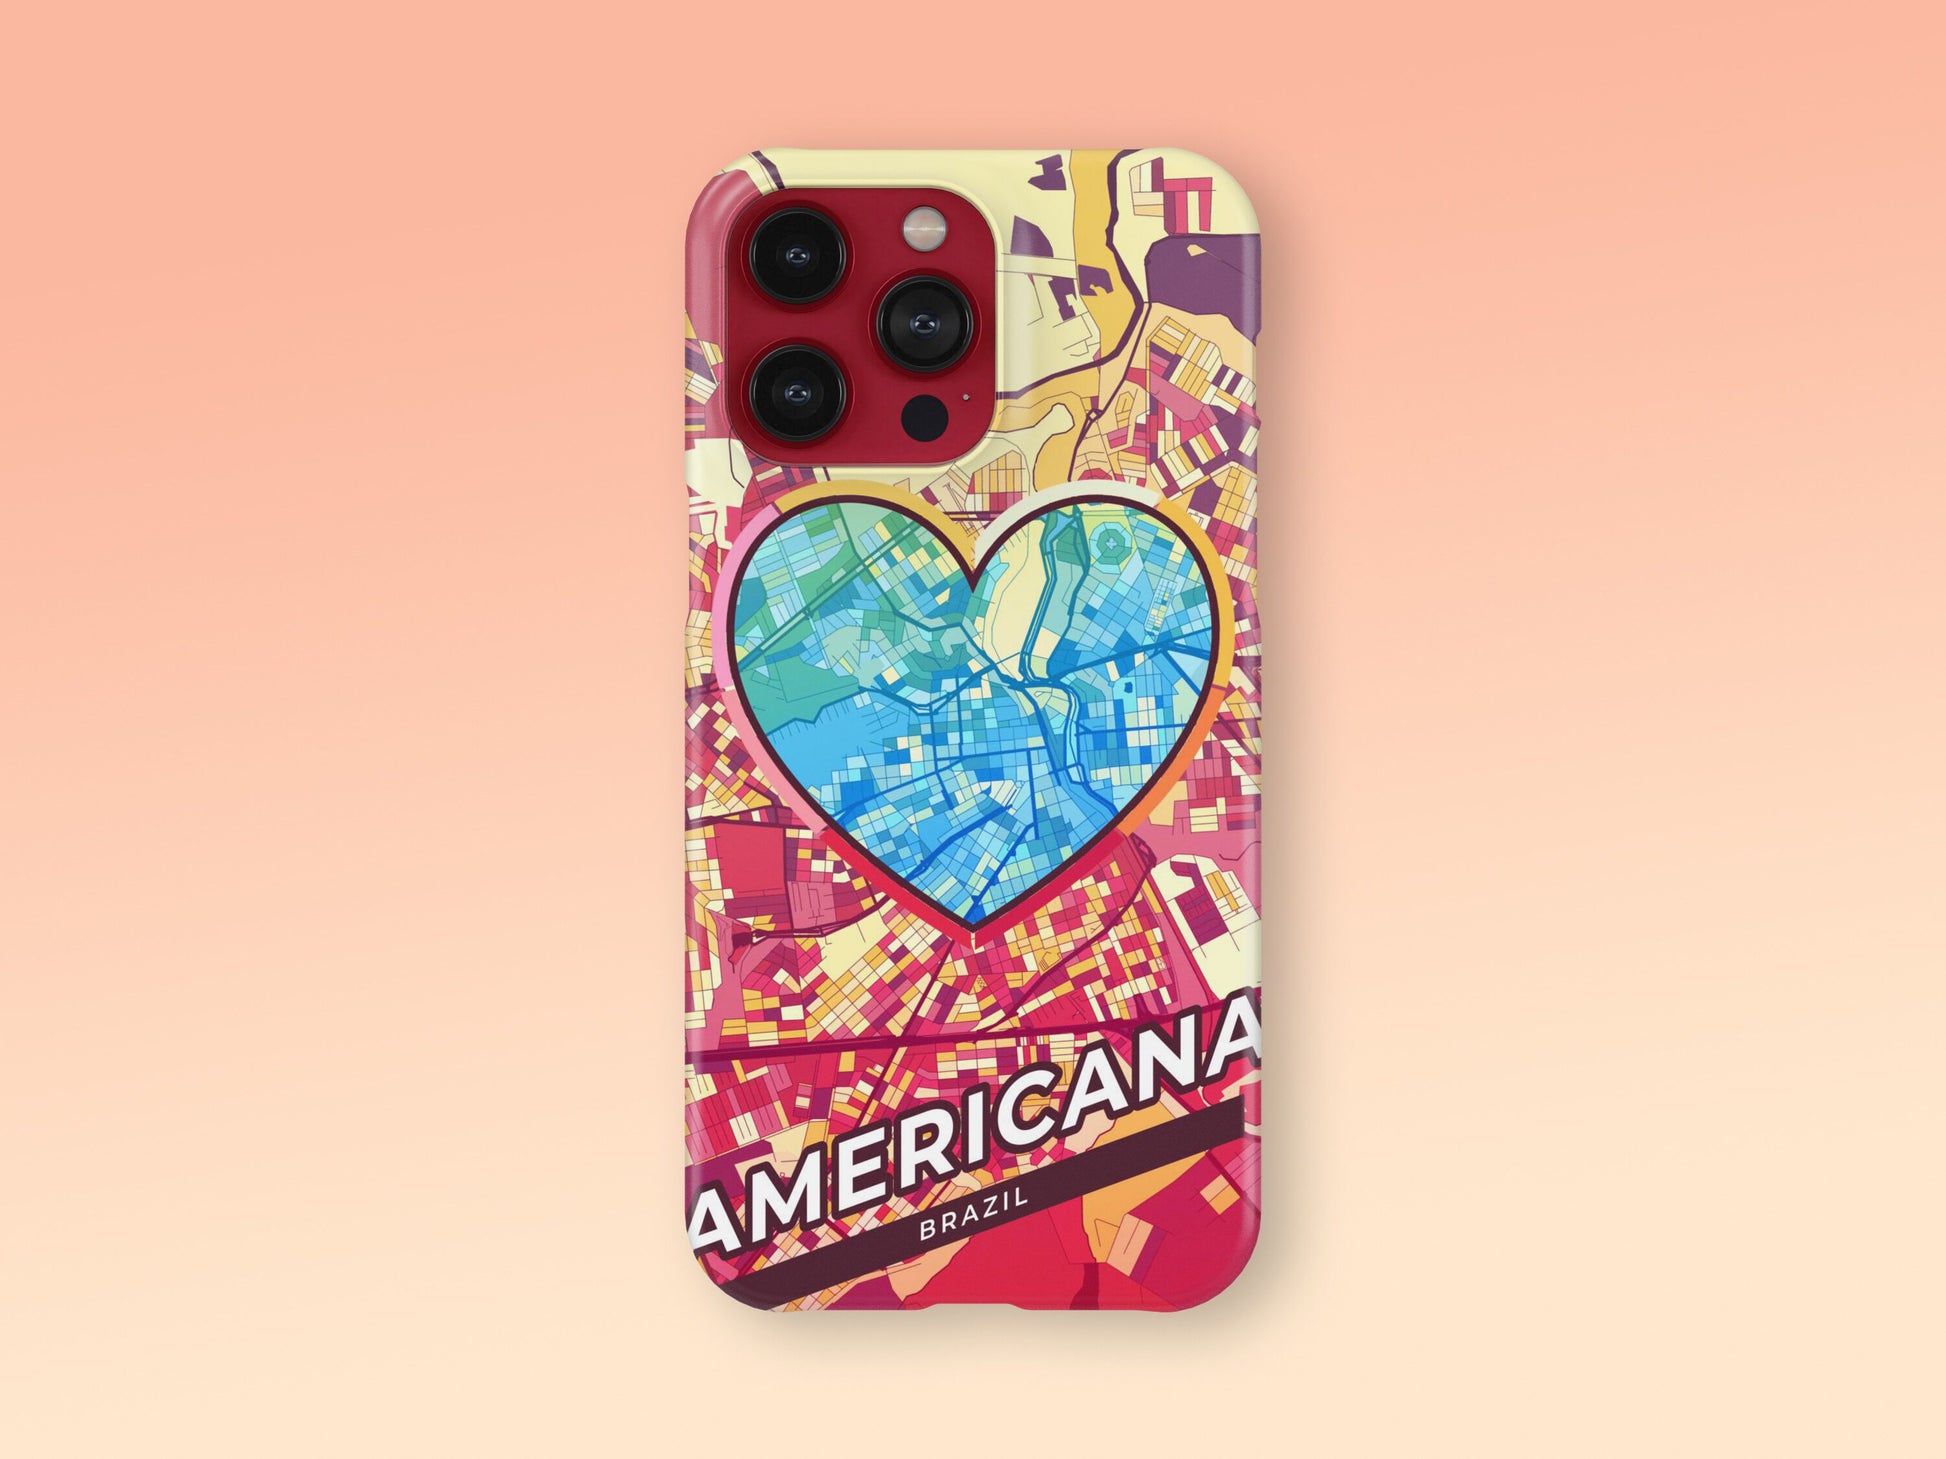 Americana Brazil slim phone case with colorful icon. Birthday, wedding or housewarming gift. Couple match cases. 2